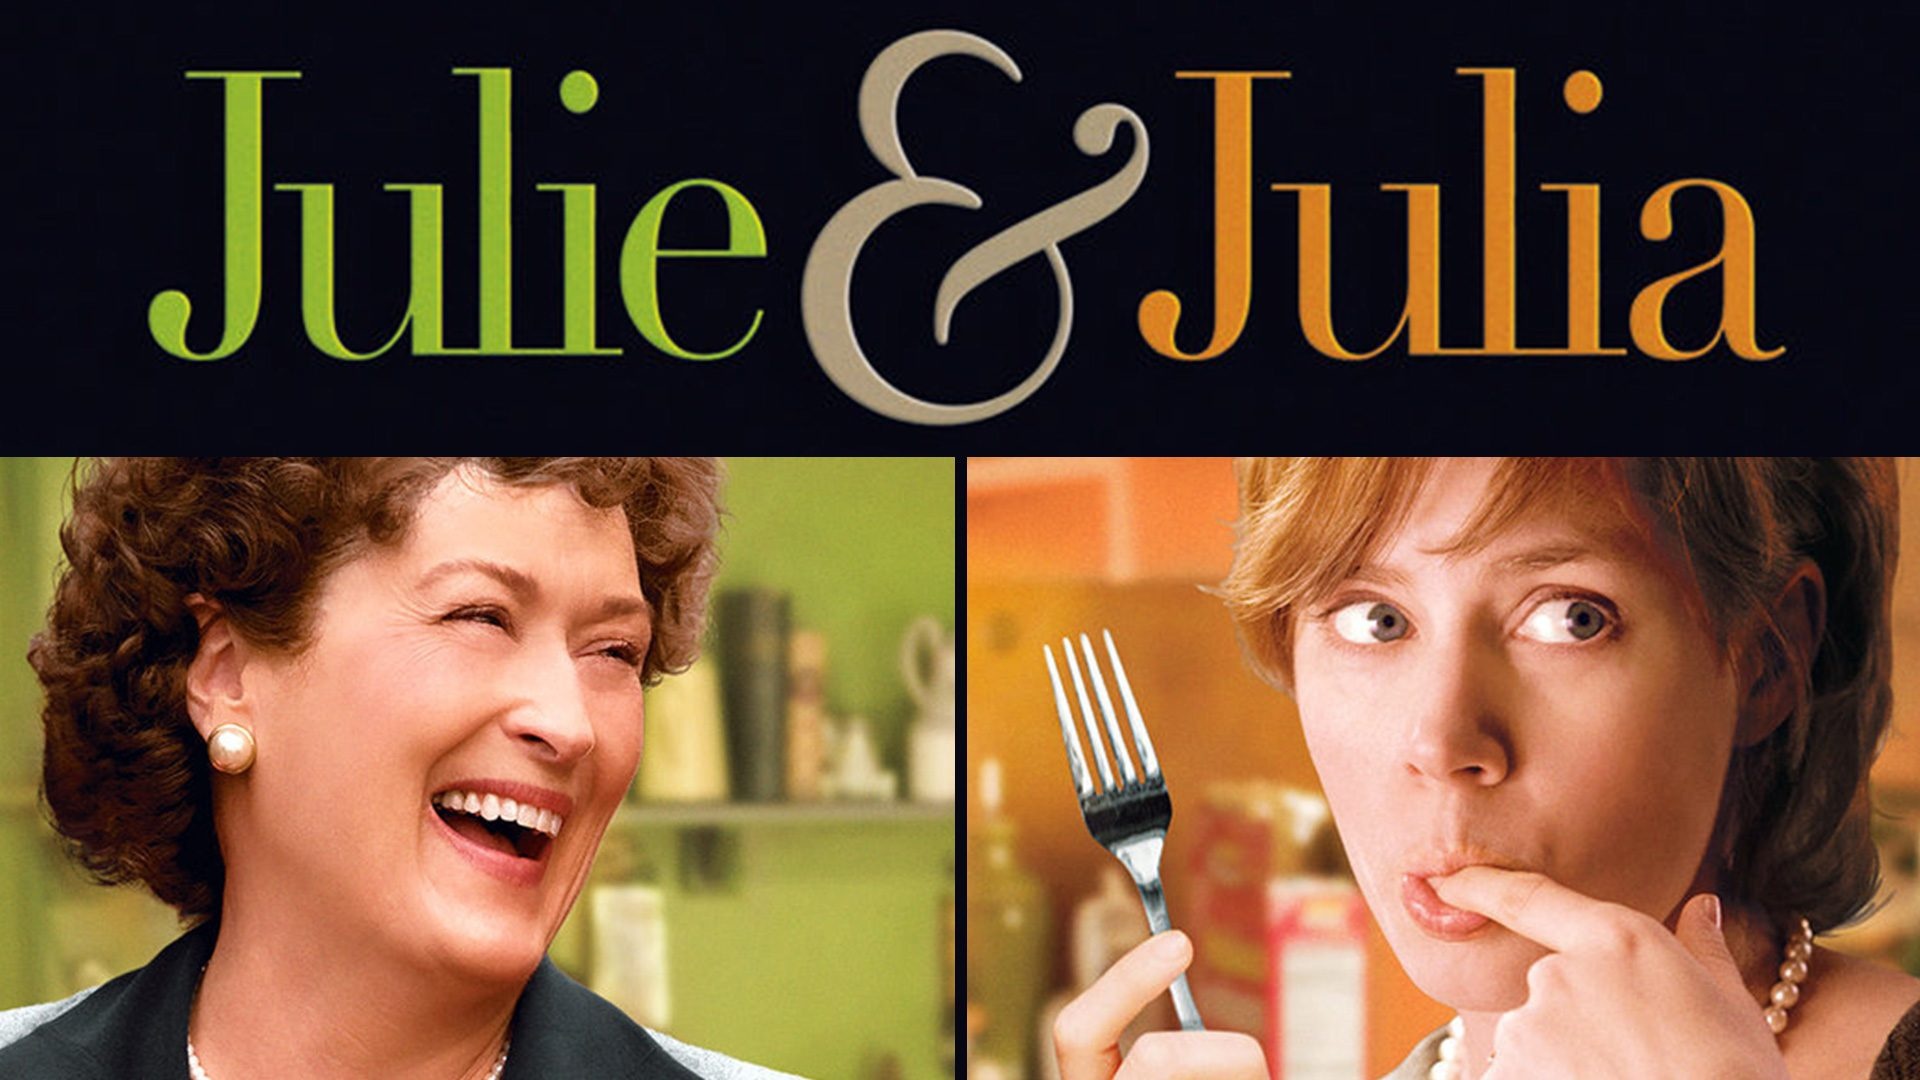 Julie and Julia: The life of young New Yorker Julie Powell, who aspires to cook all 524 recipes in Child's cookbook in 365 days. 1920x1080 Full HD Background.